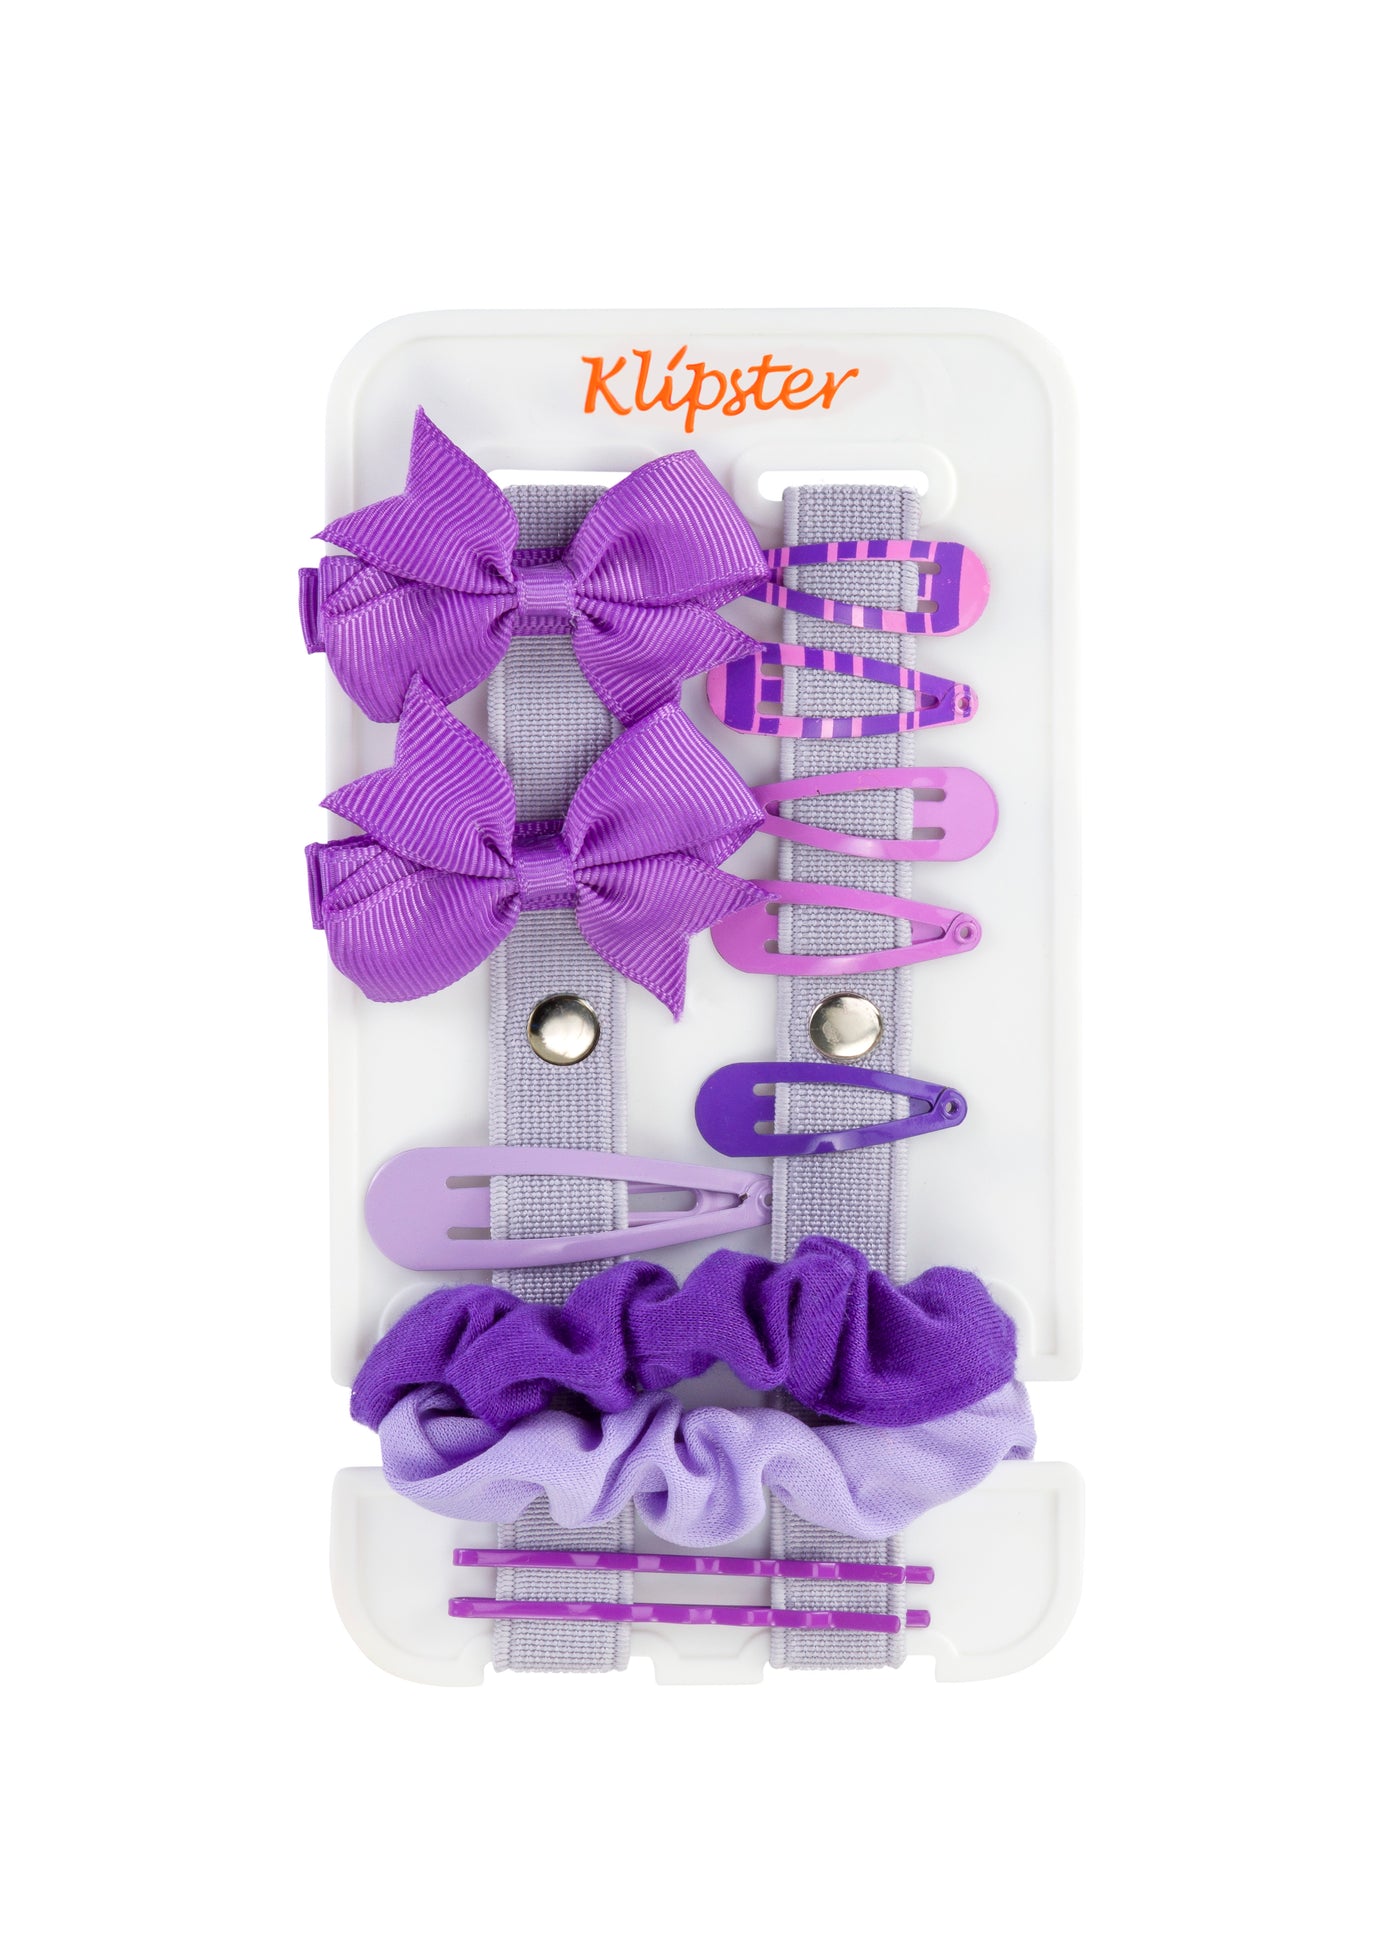 Mini Klipster Hair Accessories Organizers are double-sided, lightweight, compact, and portable. They hold hair clips, hair bows, scrunchies, hair ties, and more.